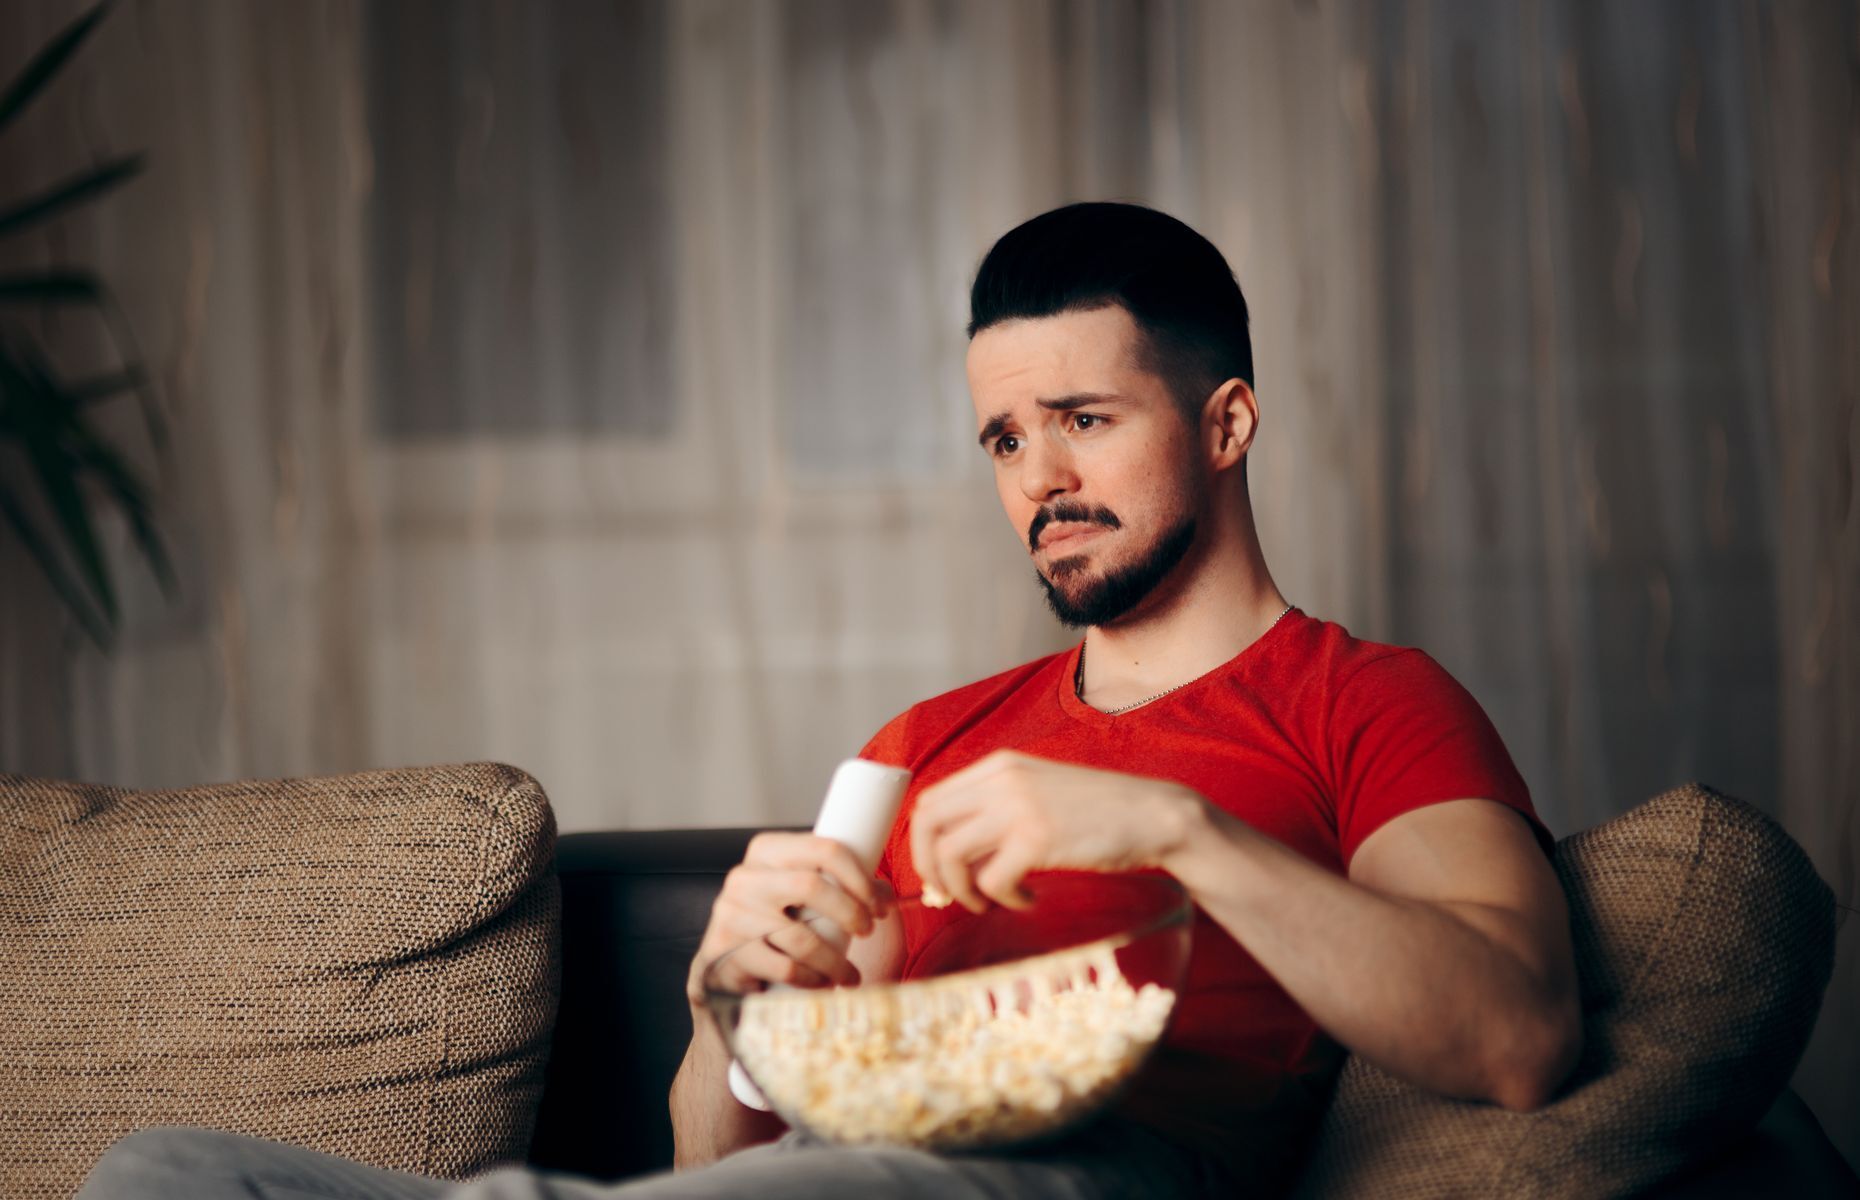 <p>But for all the joy it may bring us, is hate-watching unhealthy? Some argue that we should actually <a href="https://gizmodo.com/is-hate-watching-bad-for-you-1654143313">handle our brains with care</a> and not subject them to so much bad entertainment, just as we shouldn’t put too much junk food into our bodies.</p>